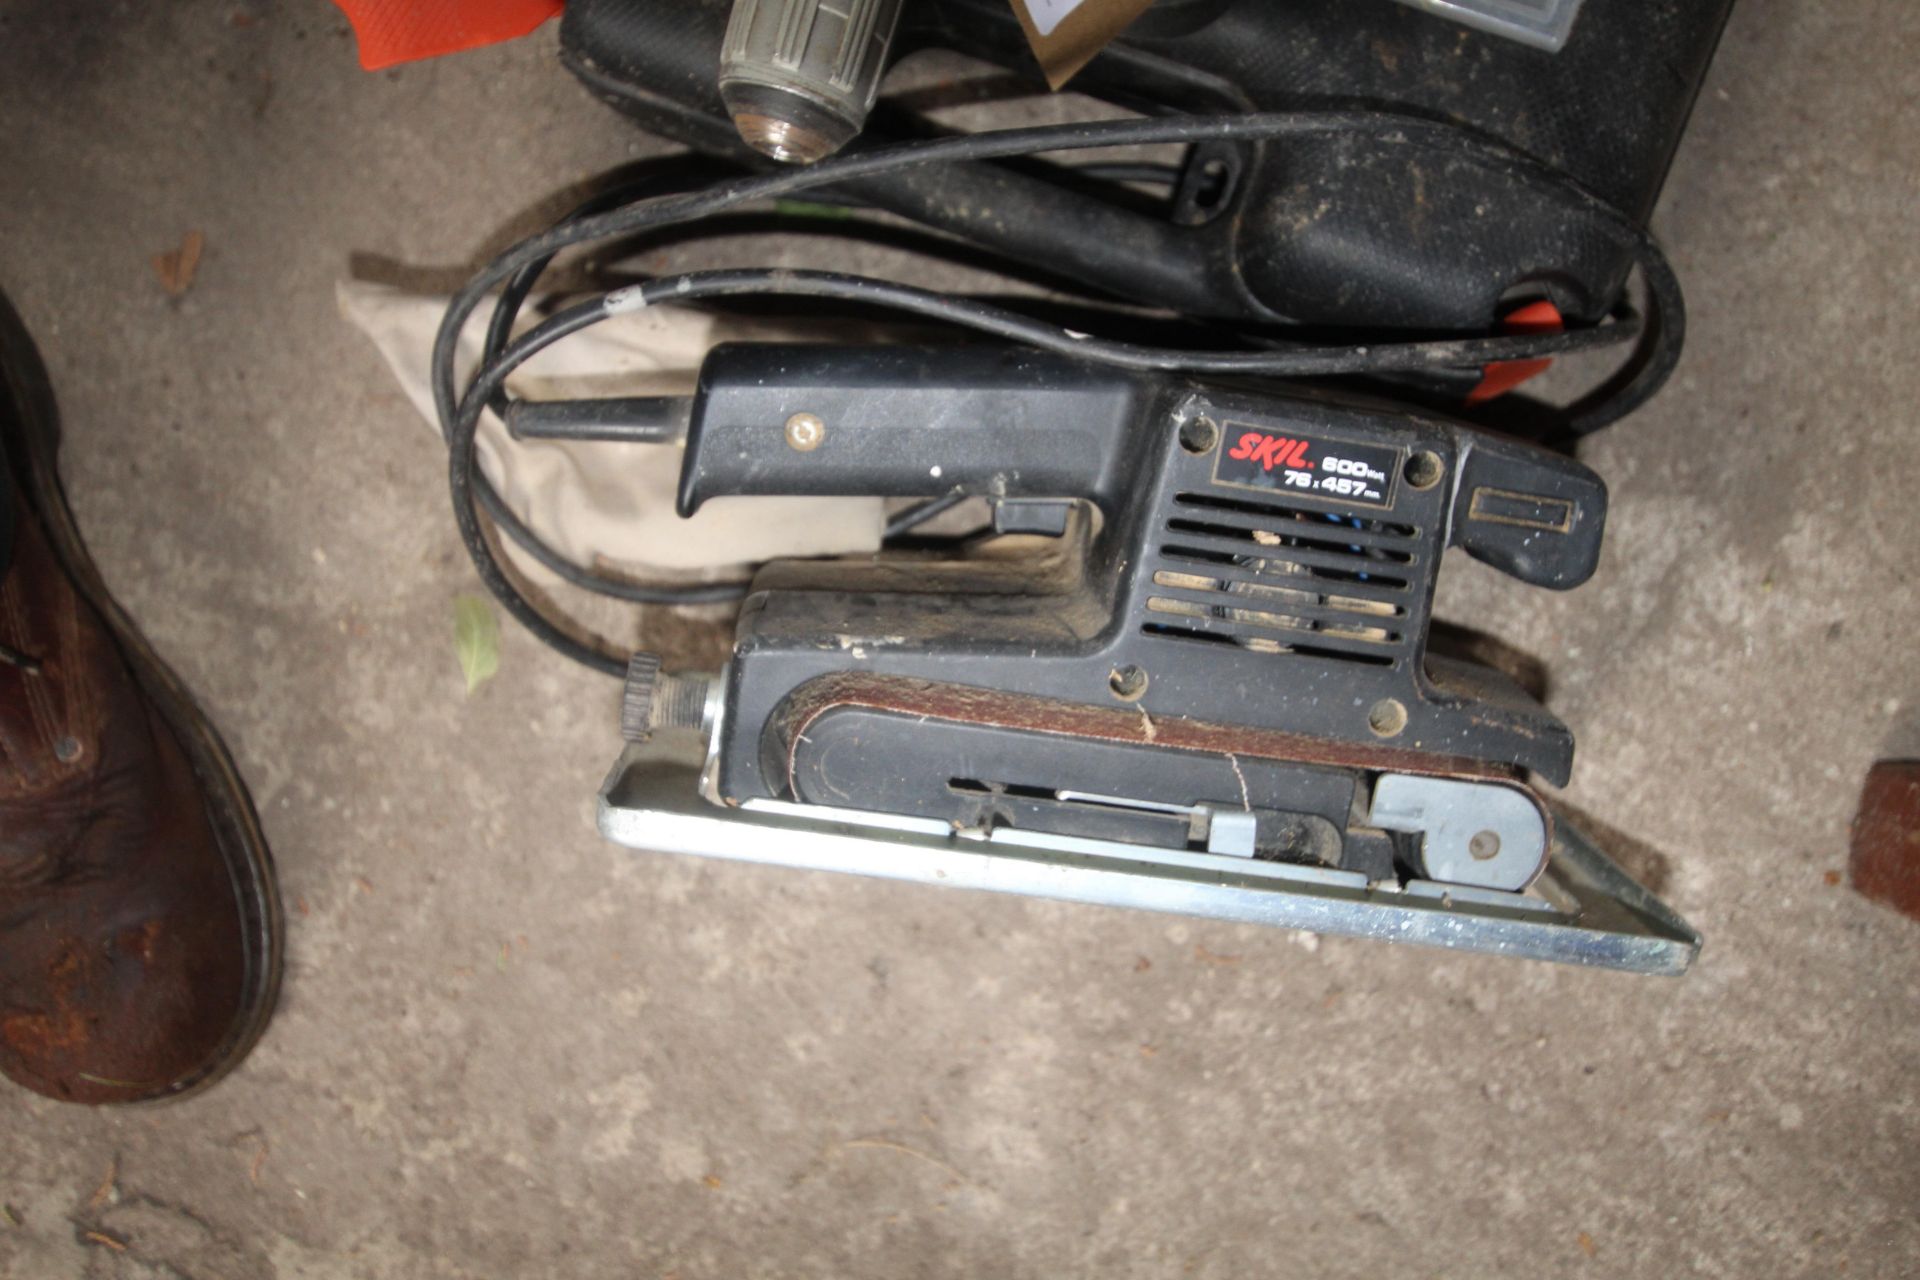 Black & Decker drill with case and a Skil belt sander. - Image 2 of 2